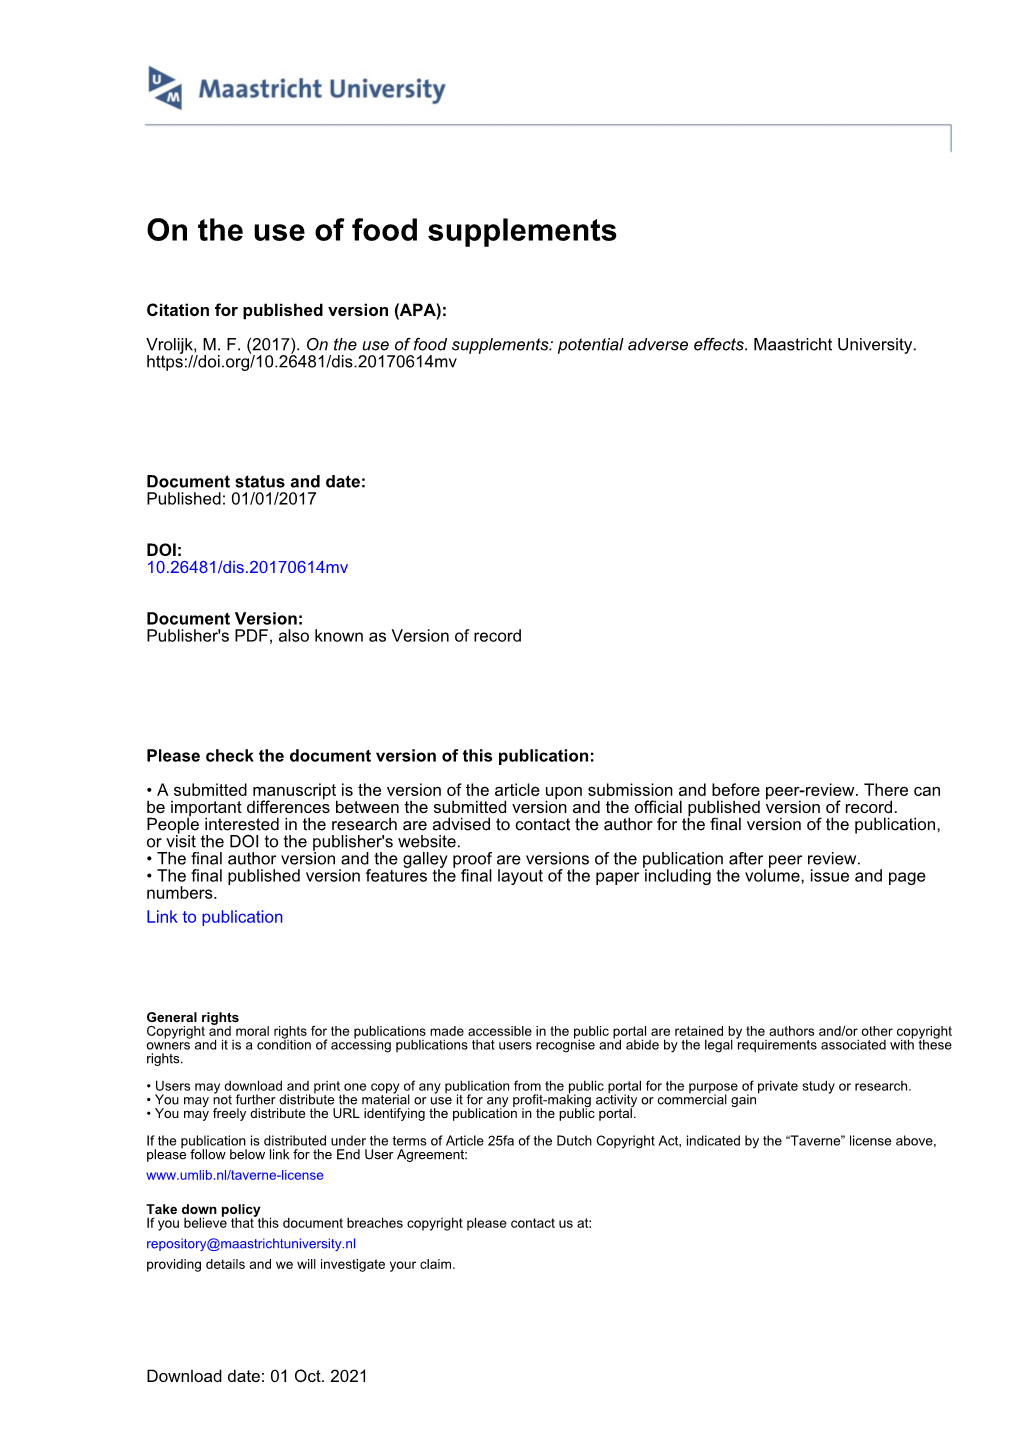 On the Use of Food Supplements